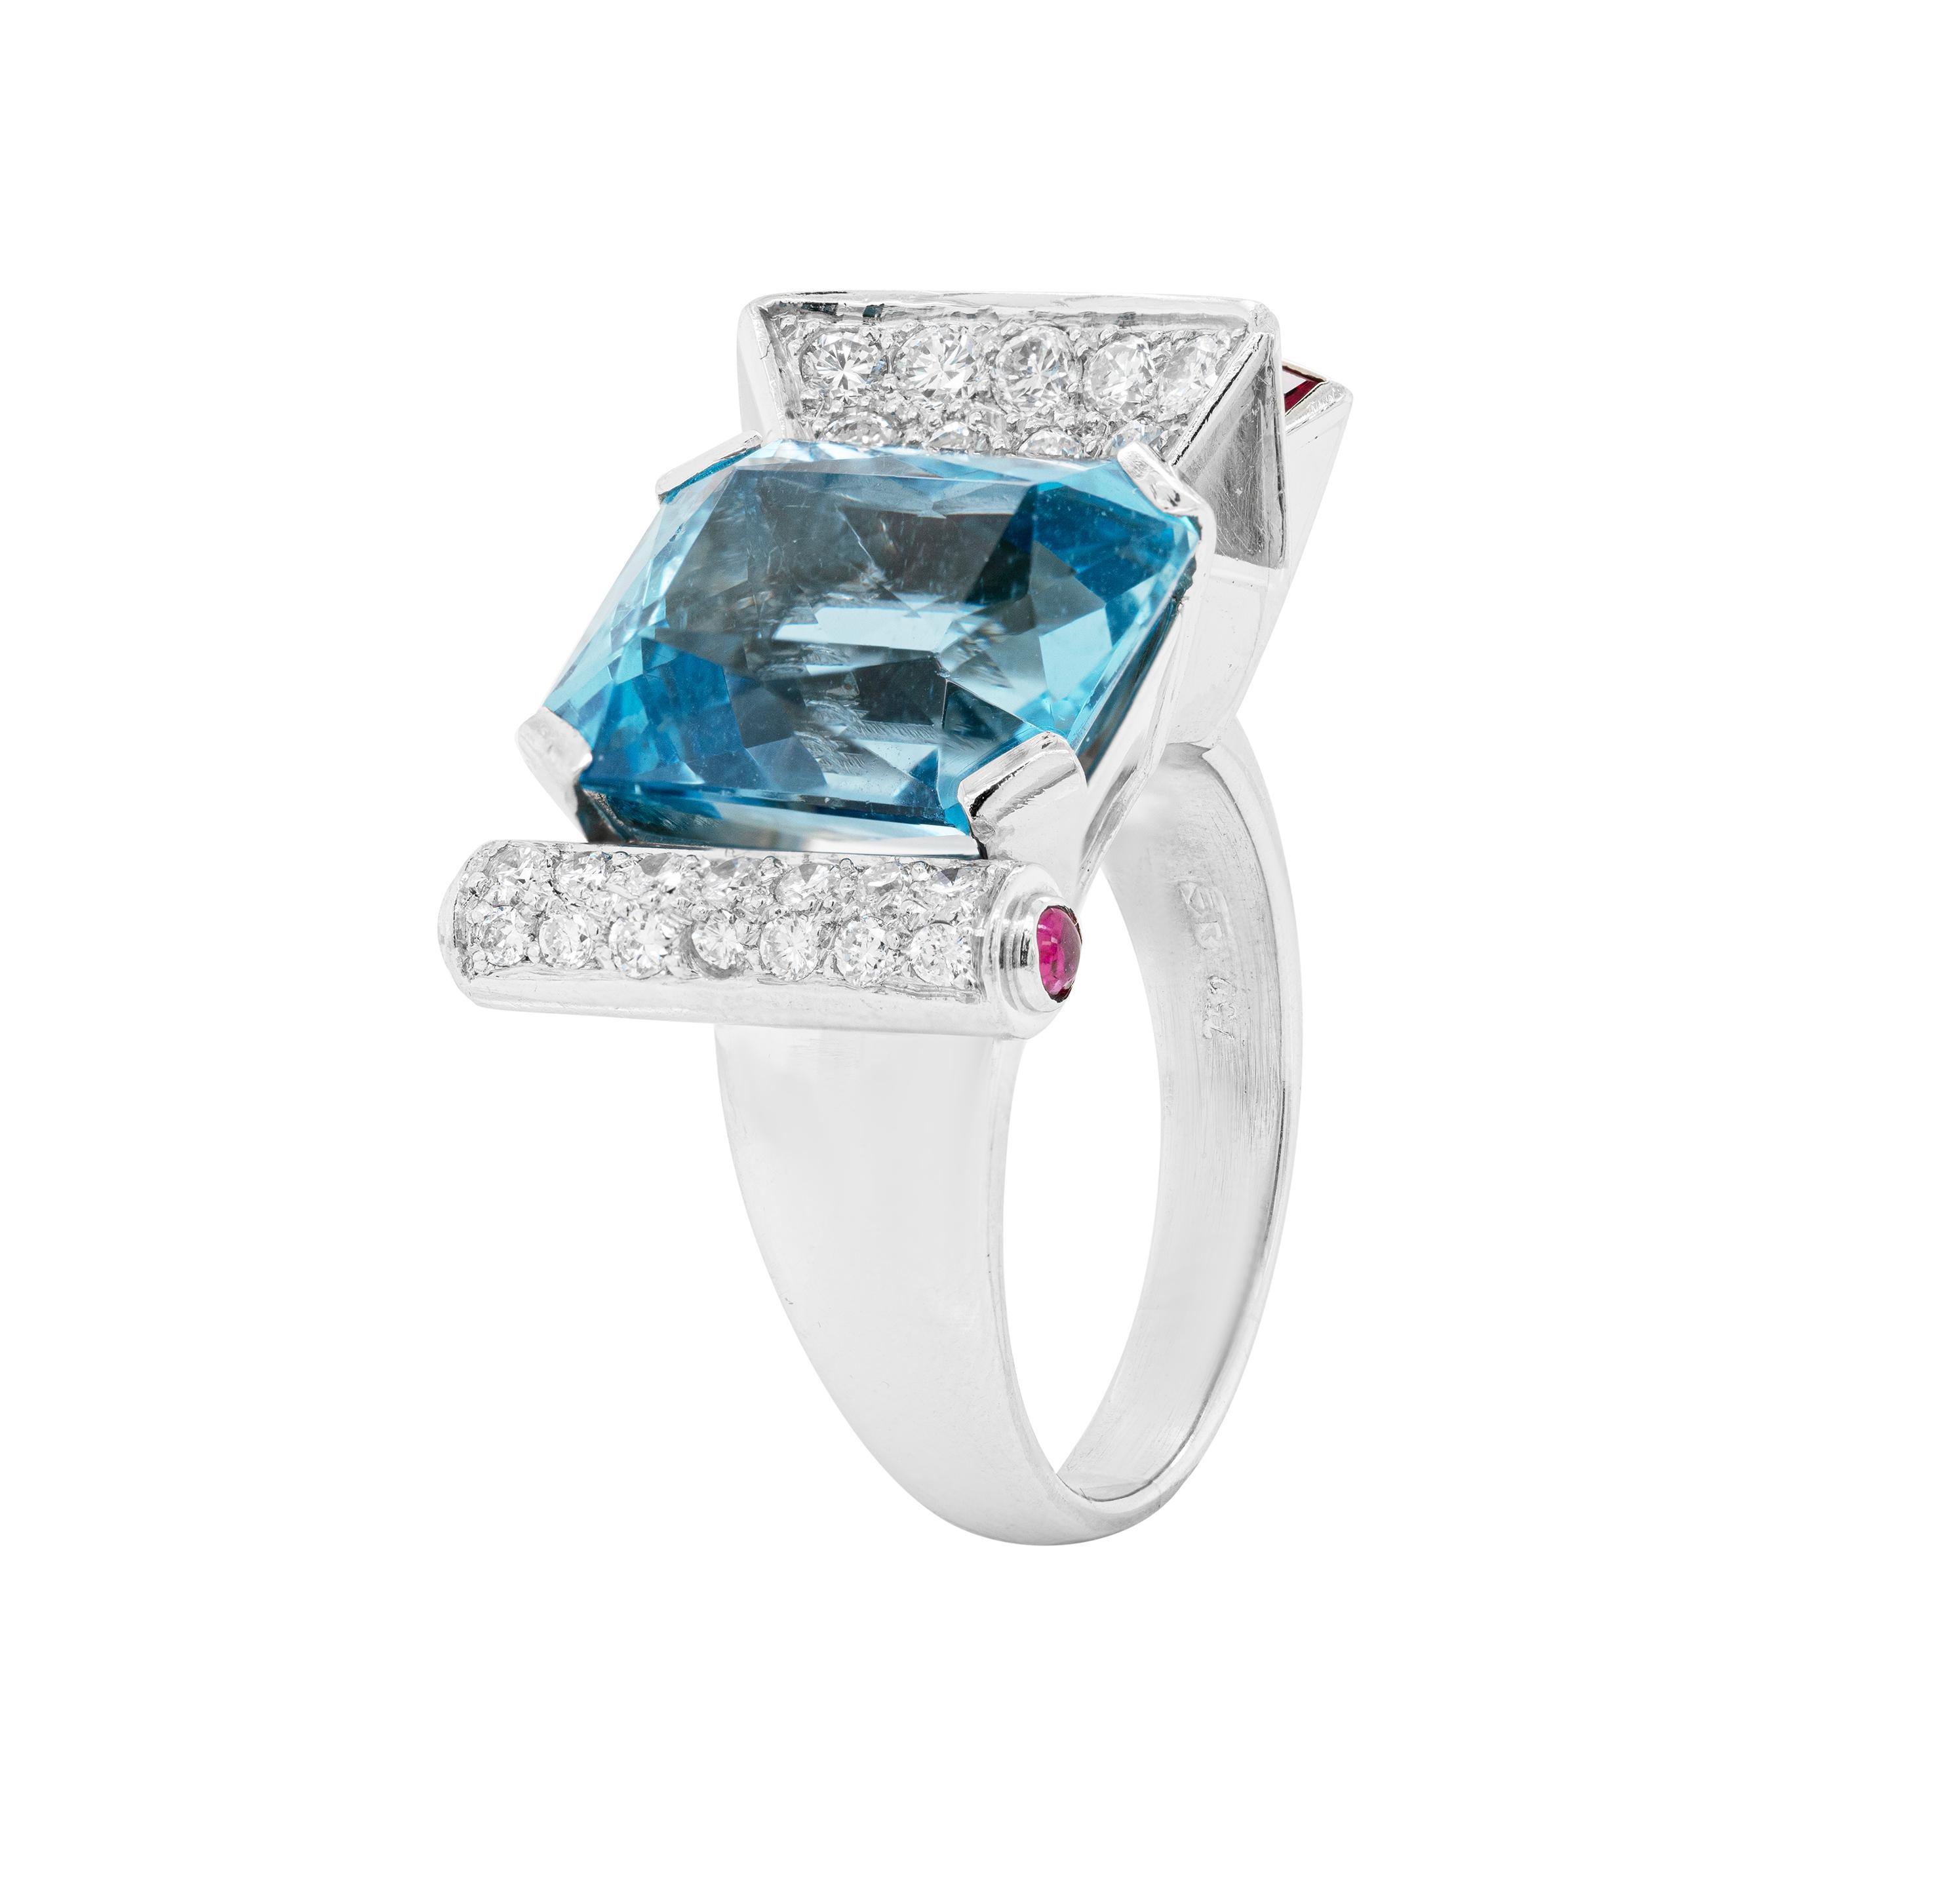 This one of a kind vintage cocktail ring features an intricate architectural design crafted from 18 carat white gold. An impressive 11.00ct square cushion cut aquamarine, mounted in a four claw, open back setting, beautifully centres the spectacular